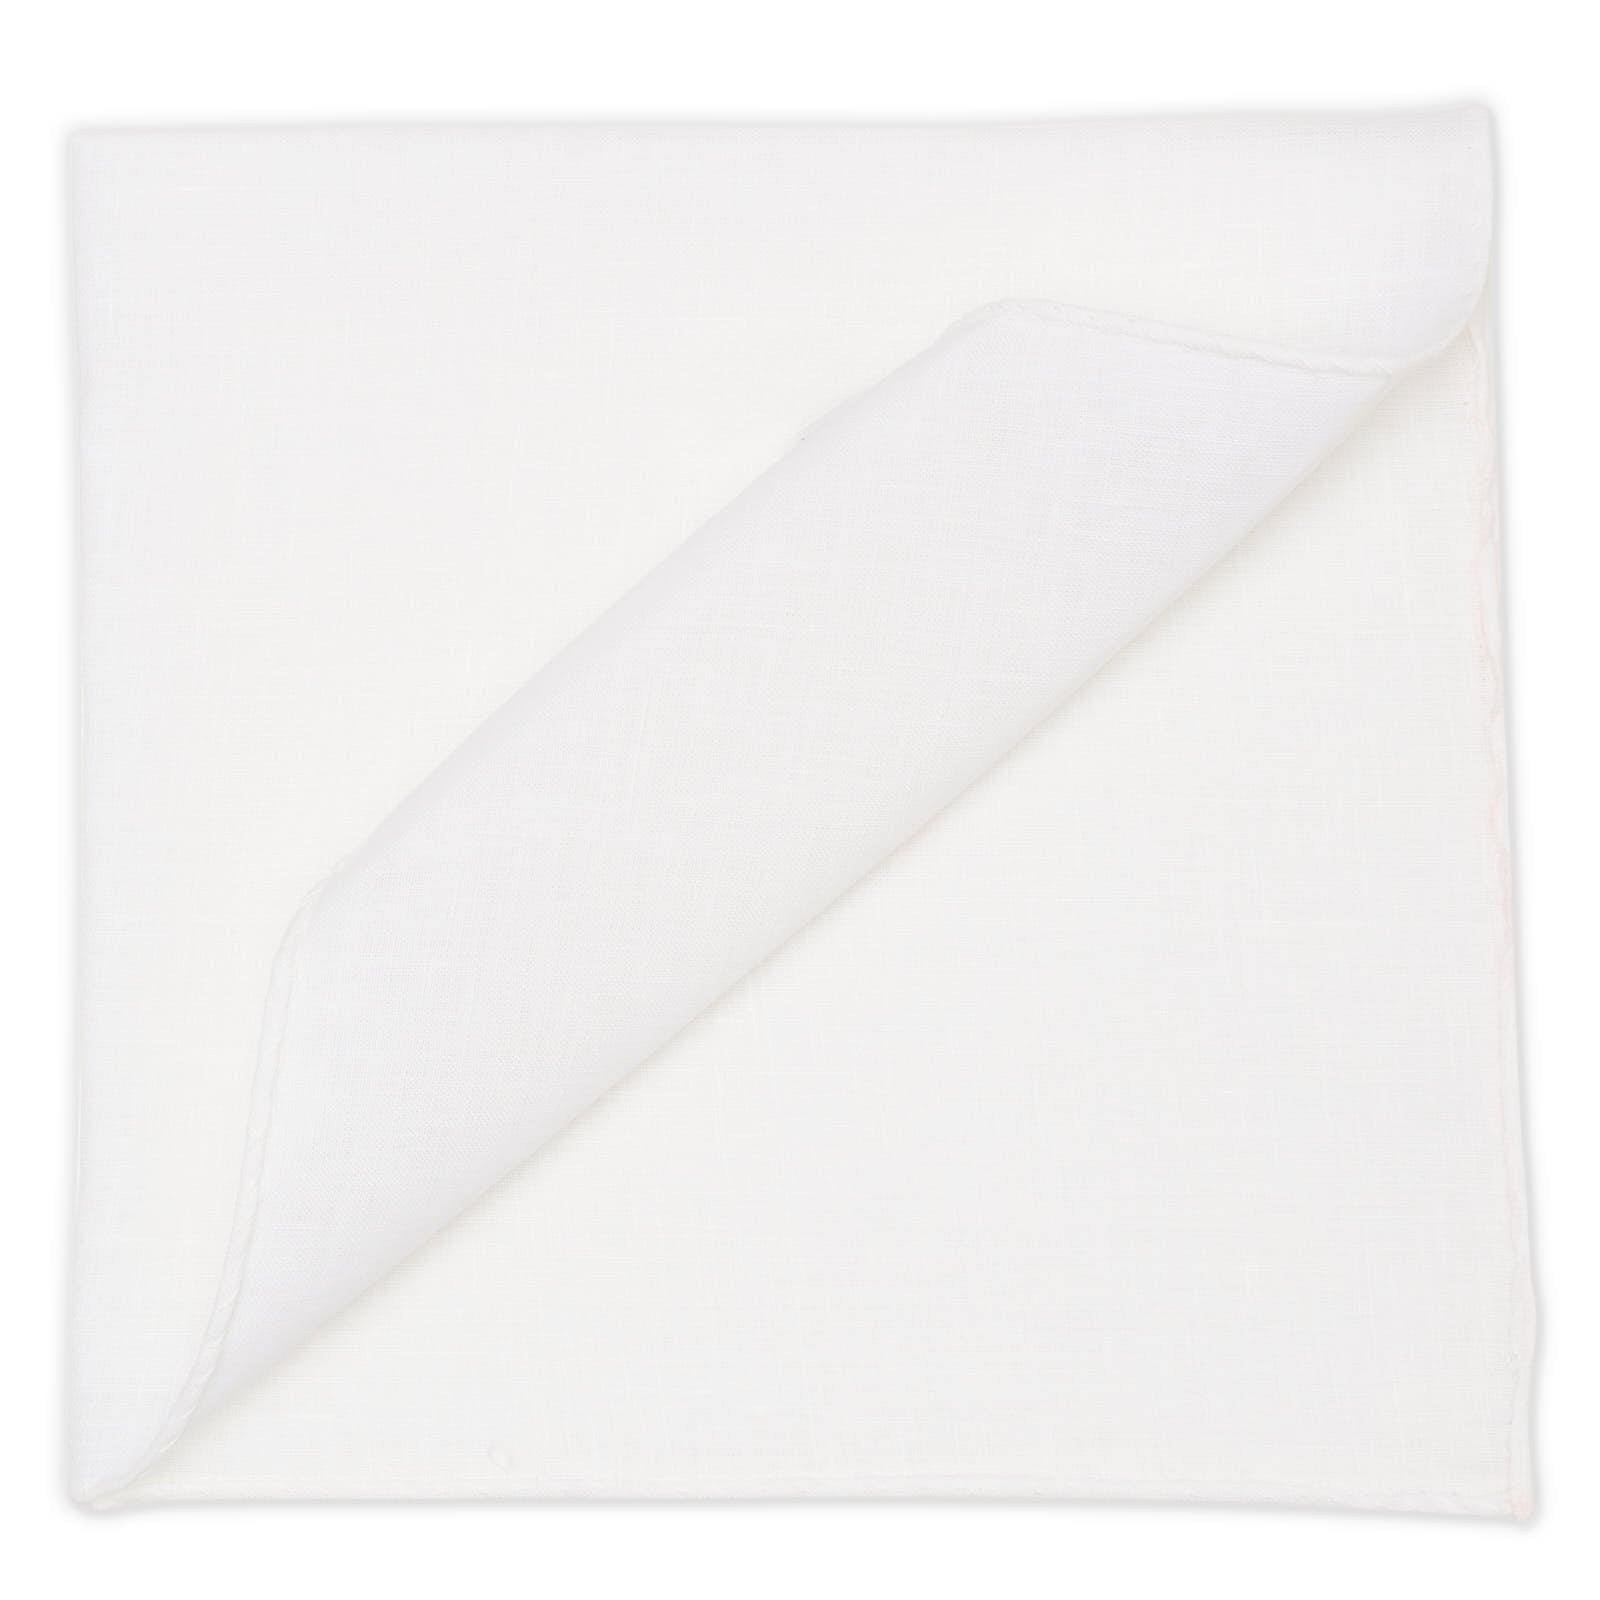 VANNUCCI Milano White Linen Pocket Square Hand Rolled Edges NEW